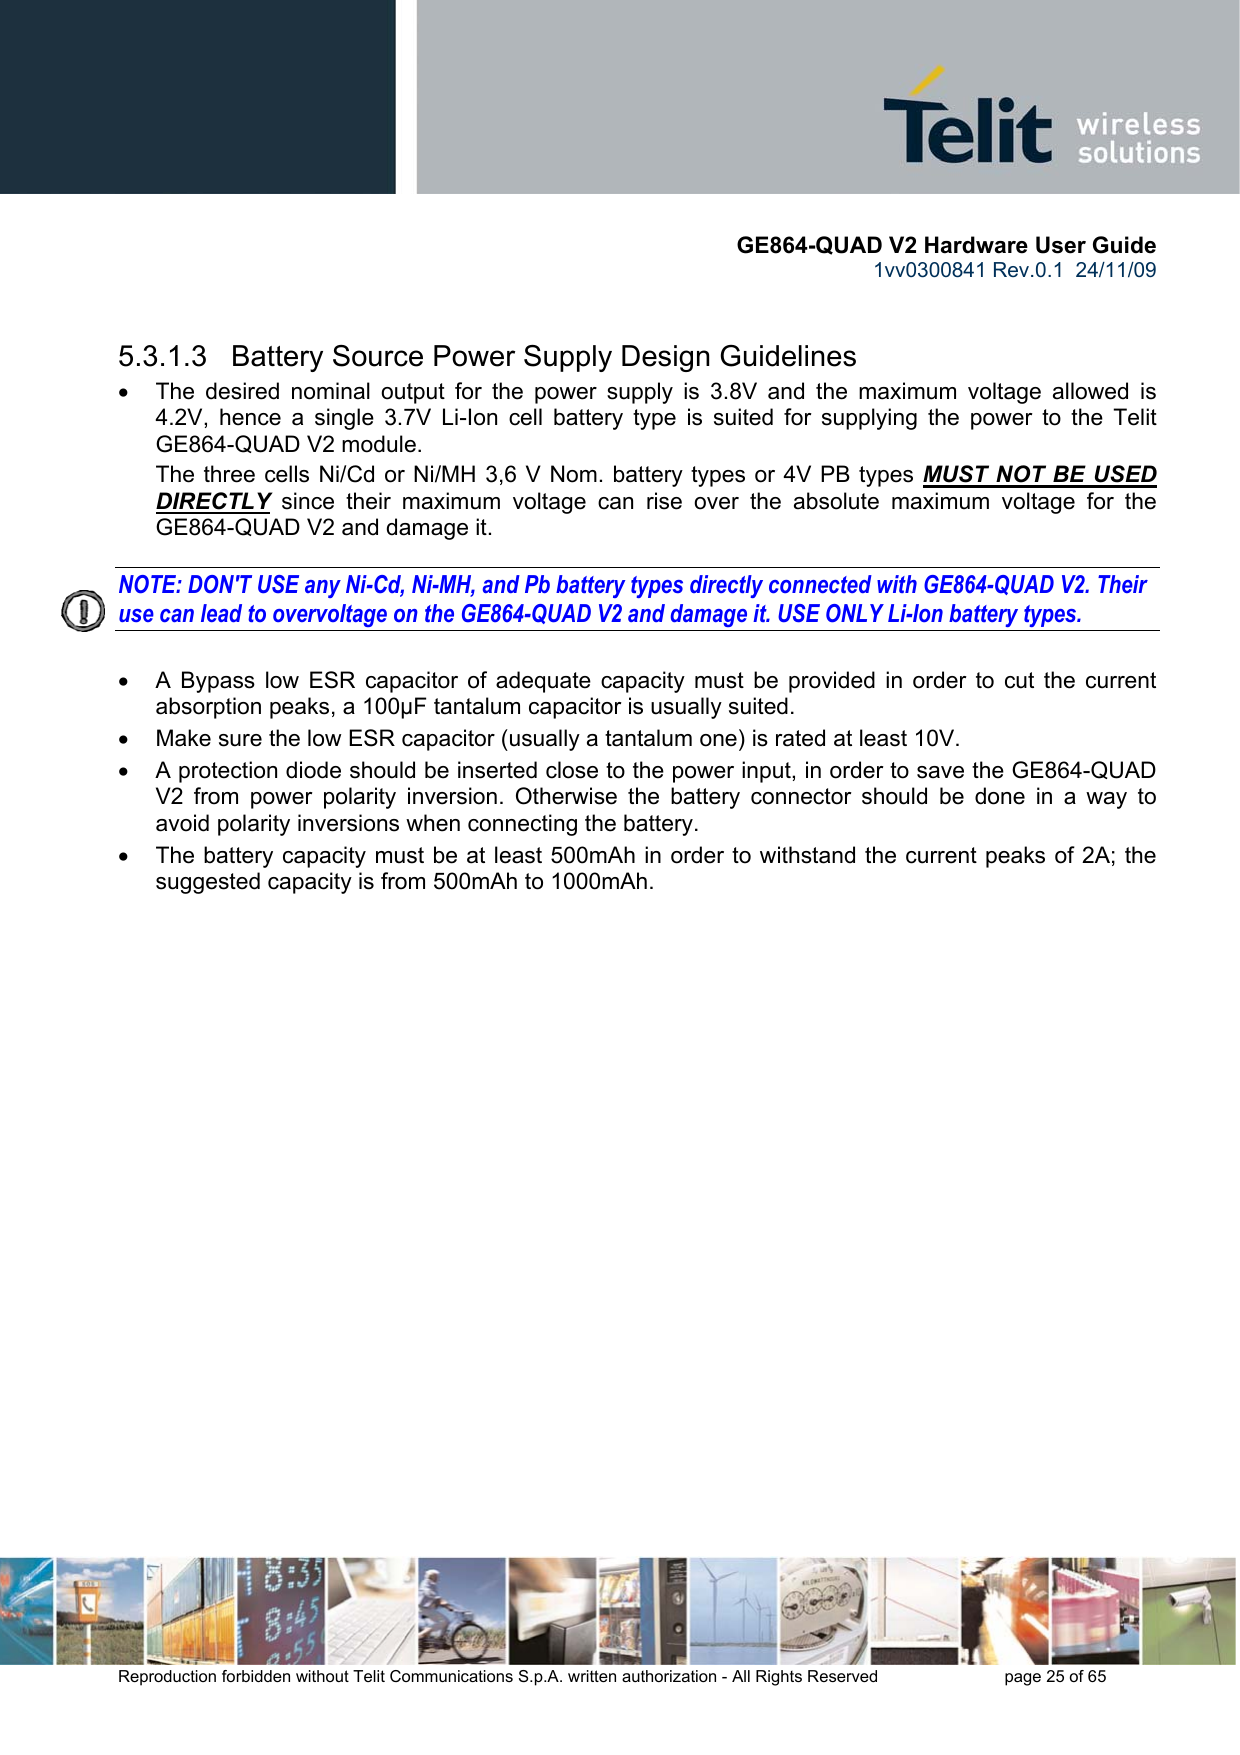       GE864-QUAD V2 Hardware User Guide 1vv0300841 Rev.0.1  24/11/09      Reproduction forbidden without Telit Communications S.p.A. written authorization - All Rights Reserved    page 25 of 65    5.3.1.3   Battery Source Power Supply Design Guidelines •  The desired nominal output for the power supply is 3.8V and the maximum voltage allowed is 4.2V, hence a single 3.7V Li-Ion cell battery type is suited for supplying the power to the Telit GE864-QUAD V2 module. The three cells Ni/Cd or Ni/MH 3,6 V Nom. battery types or 4V PB types MUST NOT BE USED DIRECTLY since their maximum voltage can rise over the absolute maximum voltage for the GE864-QUAD V2 and damage it.  NOTE: DON&apos;T USE any Ni-Cd, Ni-MH, and Pb battery types directly connected with GE864-QUAD V2. Their use can lead to overvoltage on the GE864-QUAD V2 and damage it. USE ONLY Li-Ion battery types.  •  A Bypass low ESR capacitor of adequate capacity must be provided in order to cut the current absorption peaks, a 100μF tantalum capacitor is usually suited. •  Make sure the low ESR capacitor (usually a tantalum one) is rated at least 10V. •  A protection diode should be inserted close to the power input, in order to save the GE864-QUAD V2 from power polarity inversion. Otherwise the battery connector should be done in a way to avoid polarity inversions when connecting the battery. •  The battery capacity must be at least 500mAh in order to withstand the current peaks of 2A; the suggested capacity is from 500mAh to 1000mAh. 